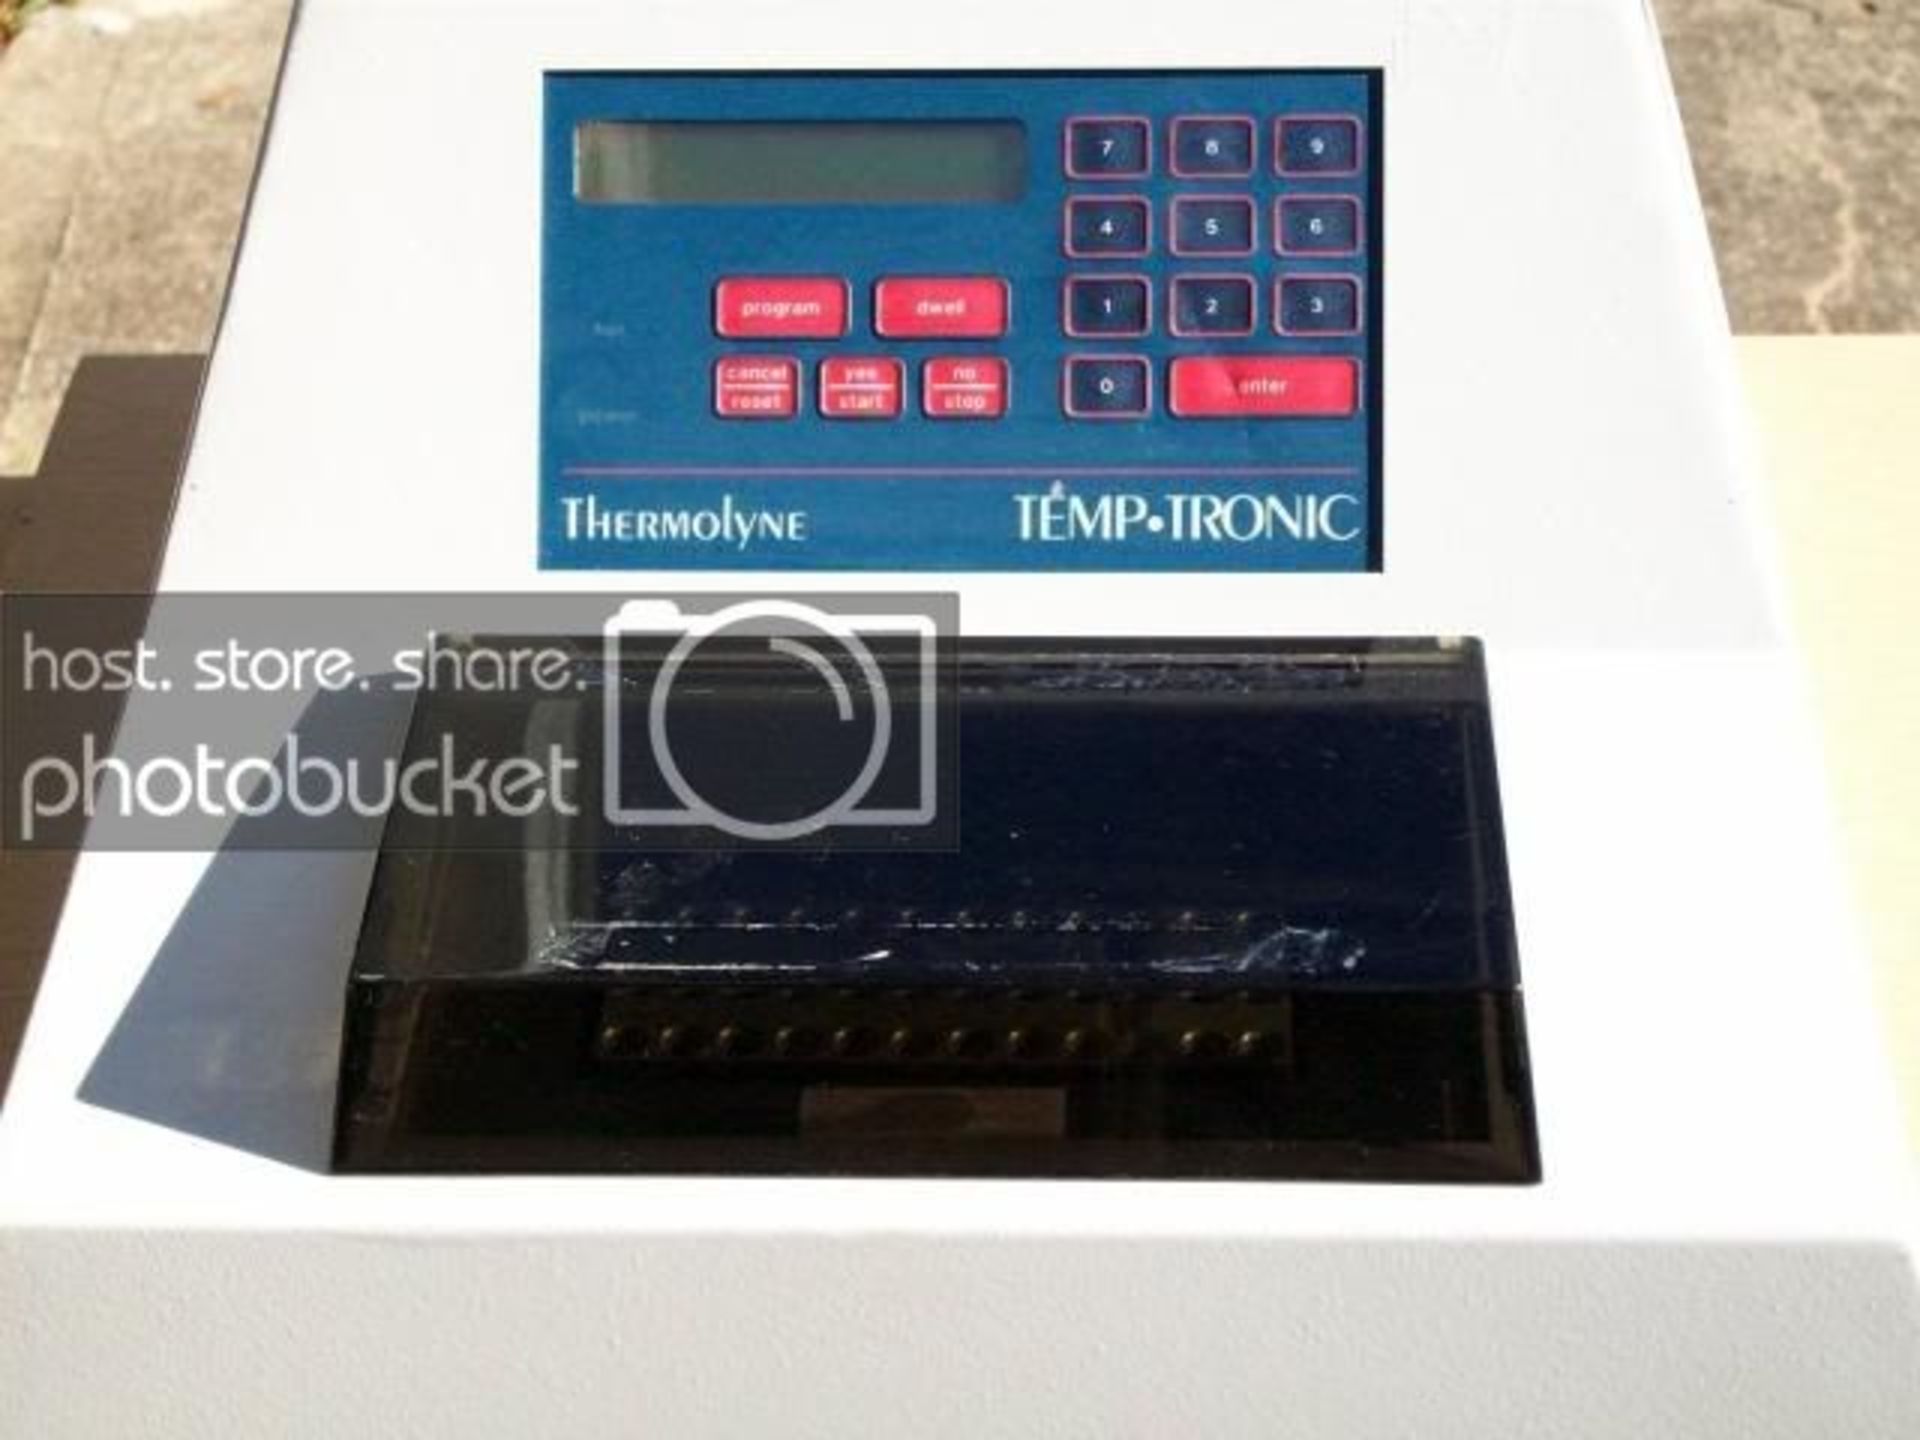 Thermolyne Temp-Tronic DB66925 DNA Thermal Cycler, Qty 1, 320394762884 - Image 8 of 9